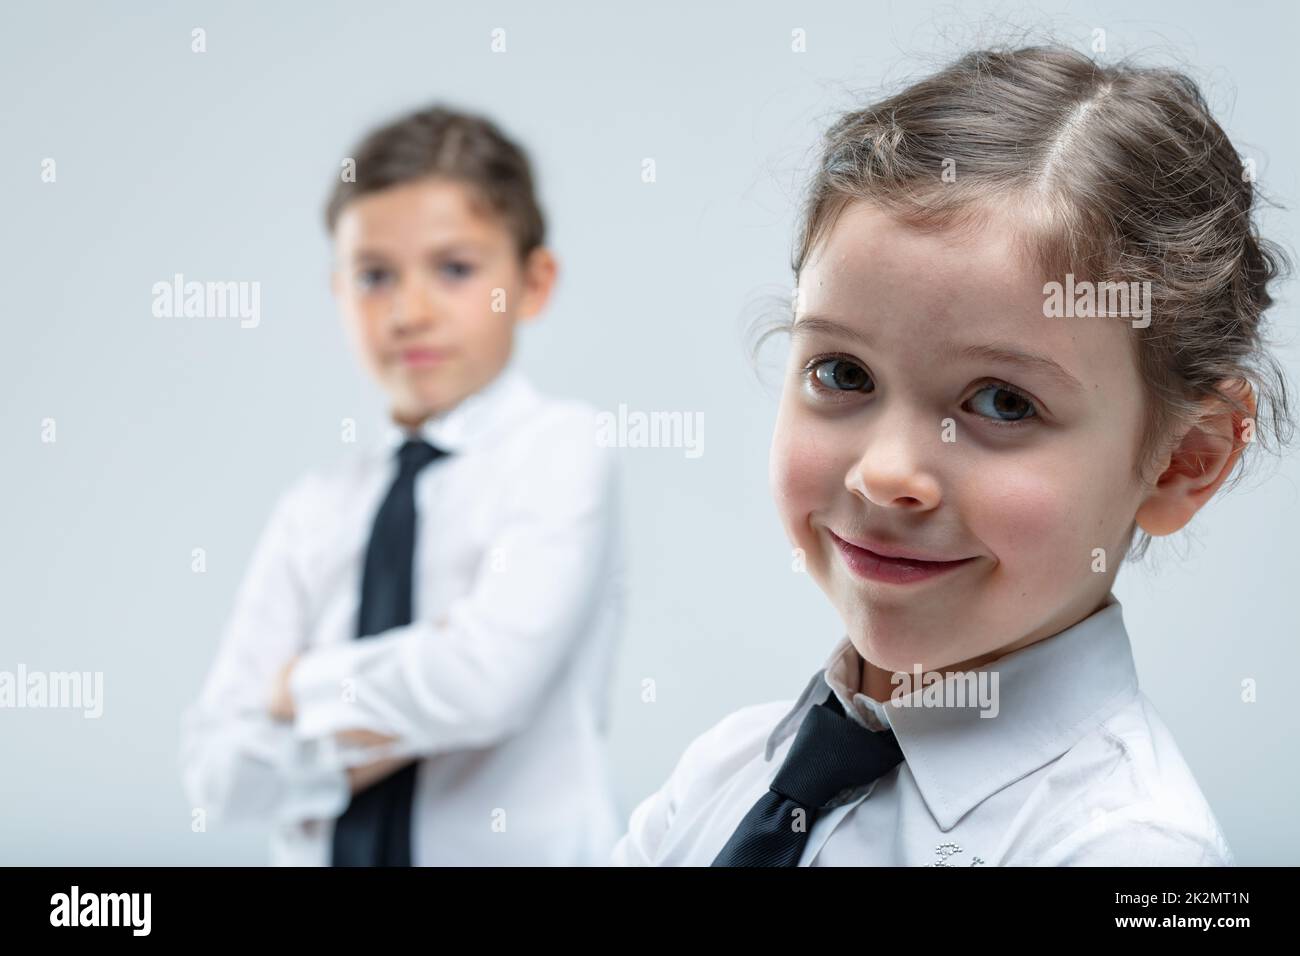 Pretty little girl with lovely warm friendly smile Stock Photo